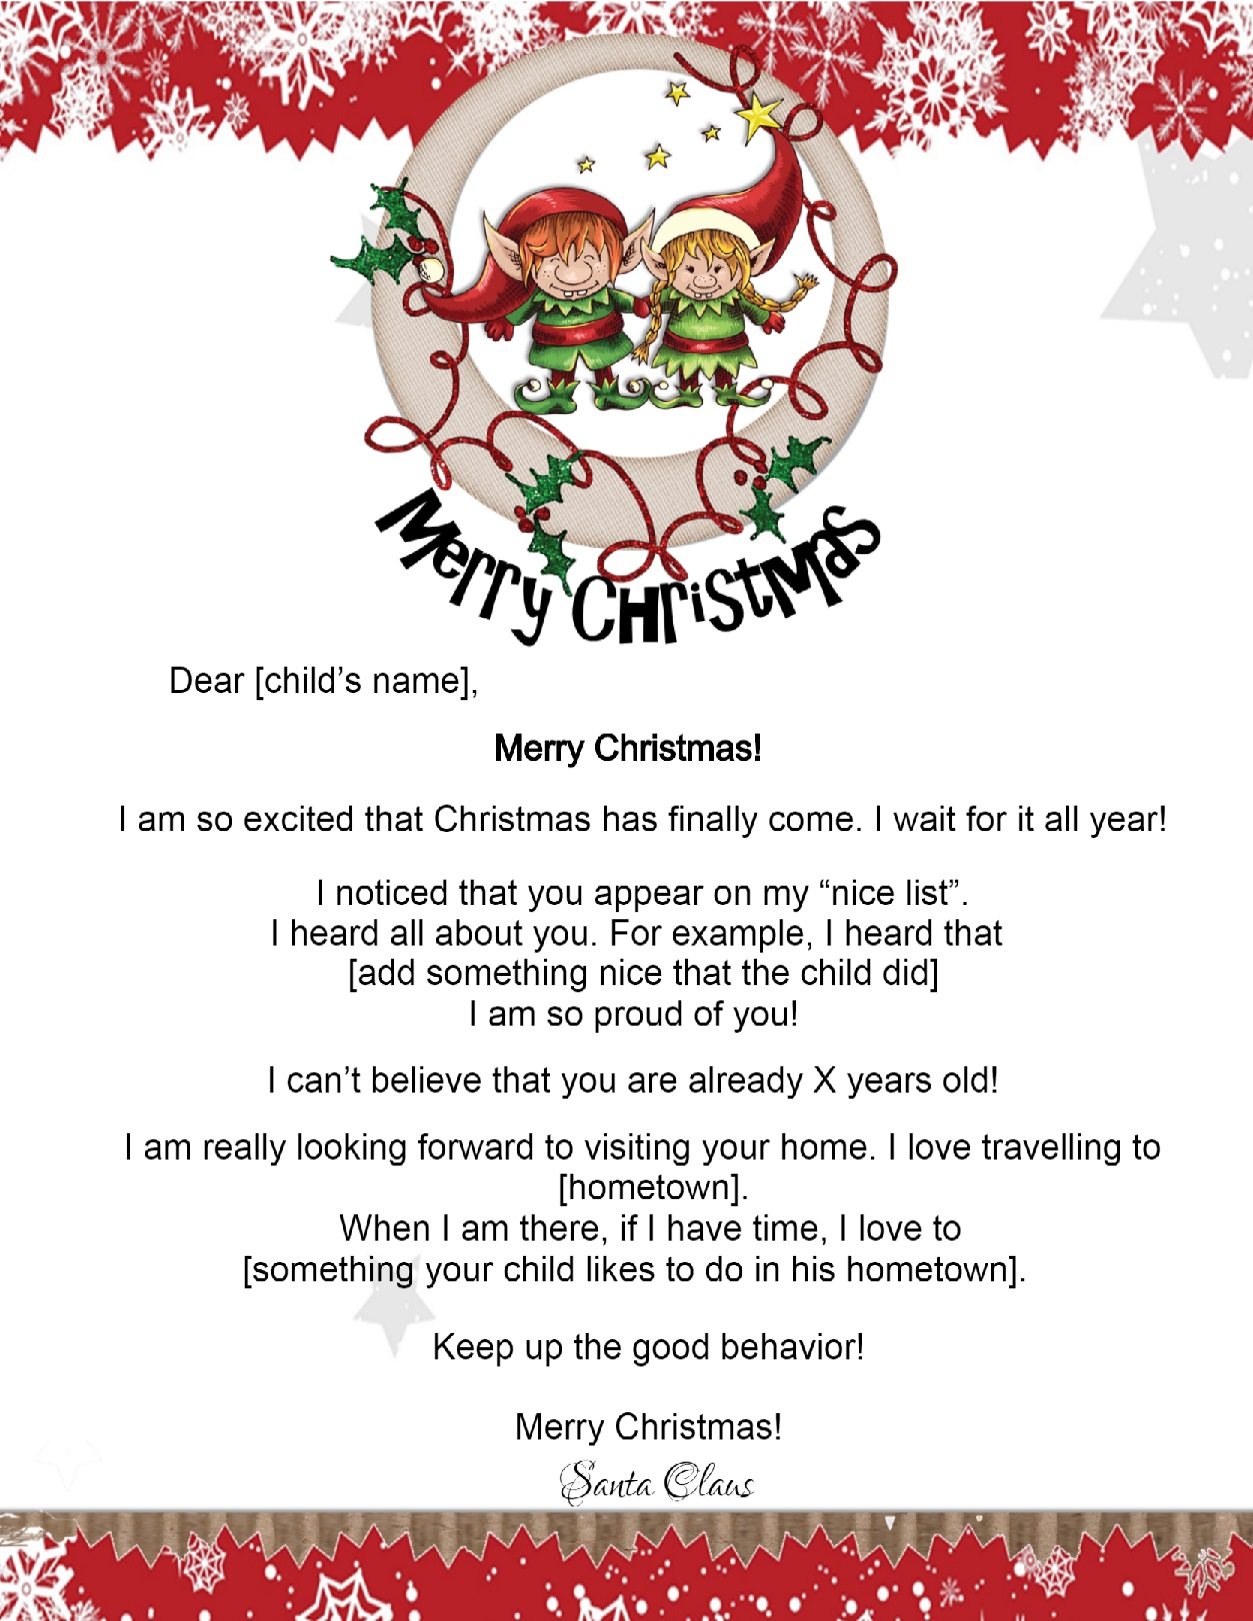 Santa letter free downloadable templates - iopps